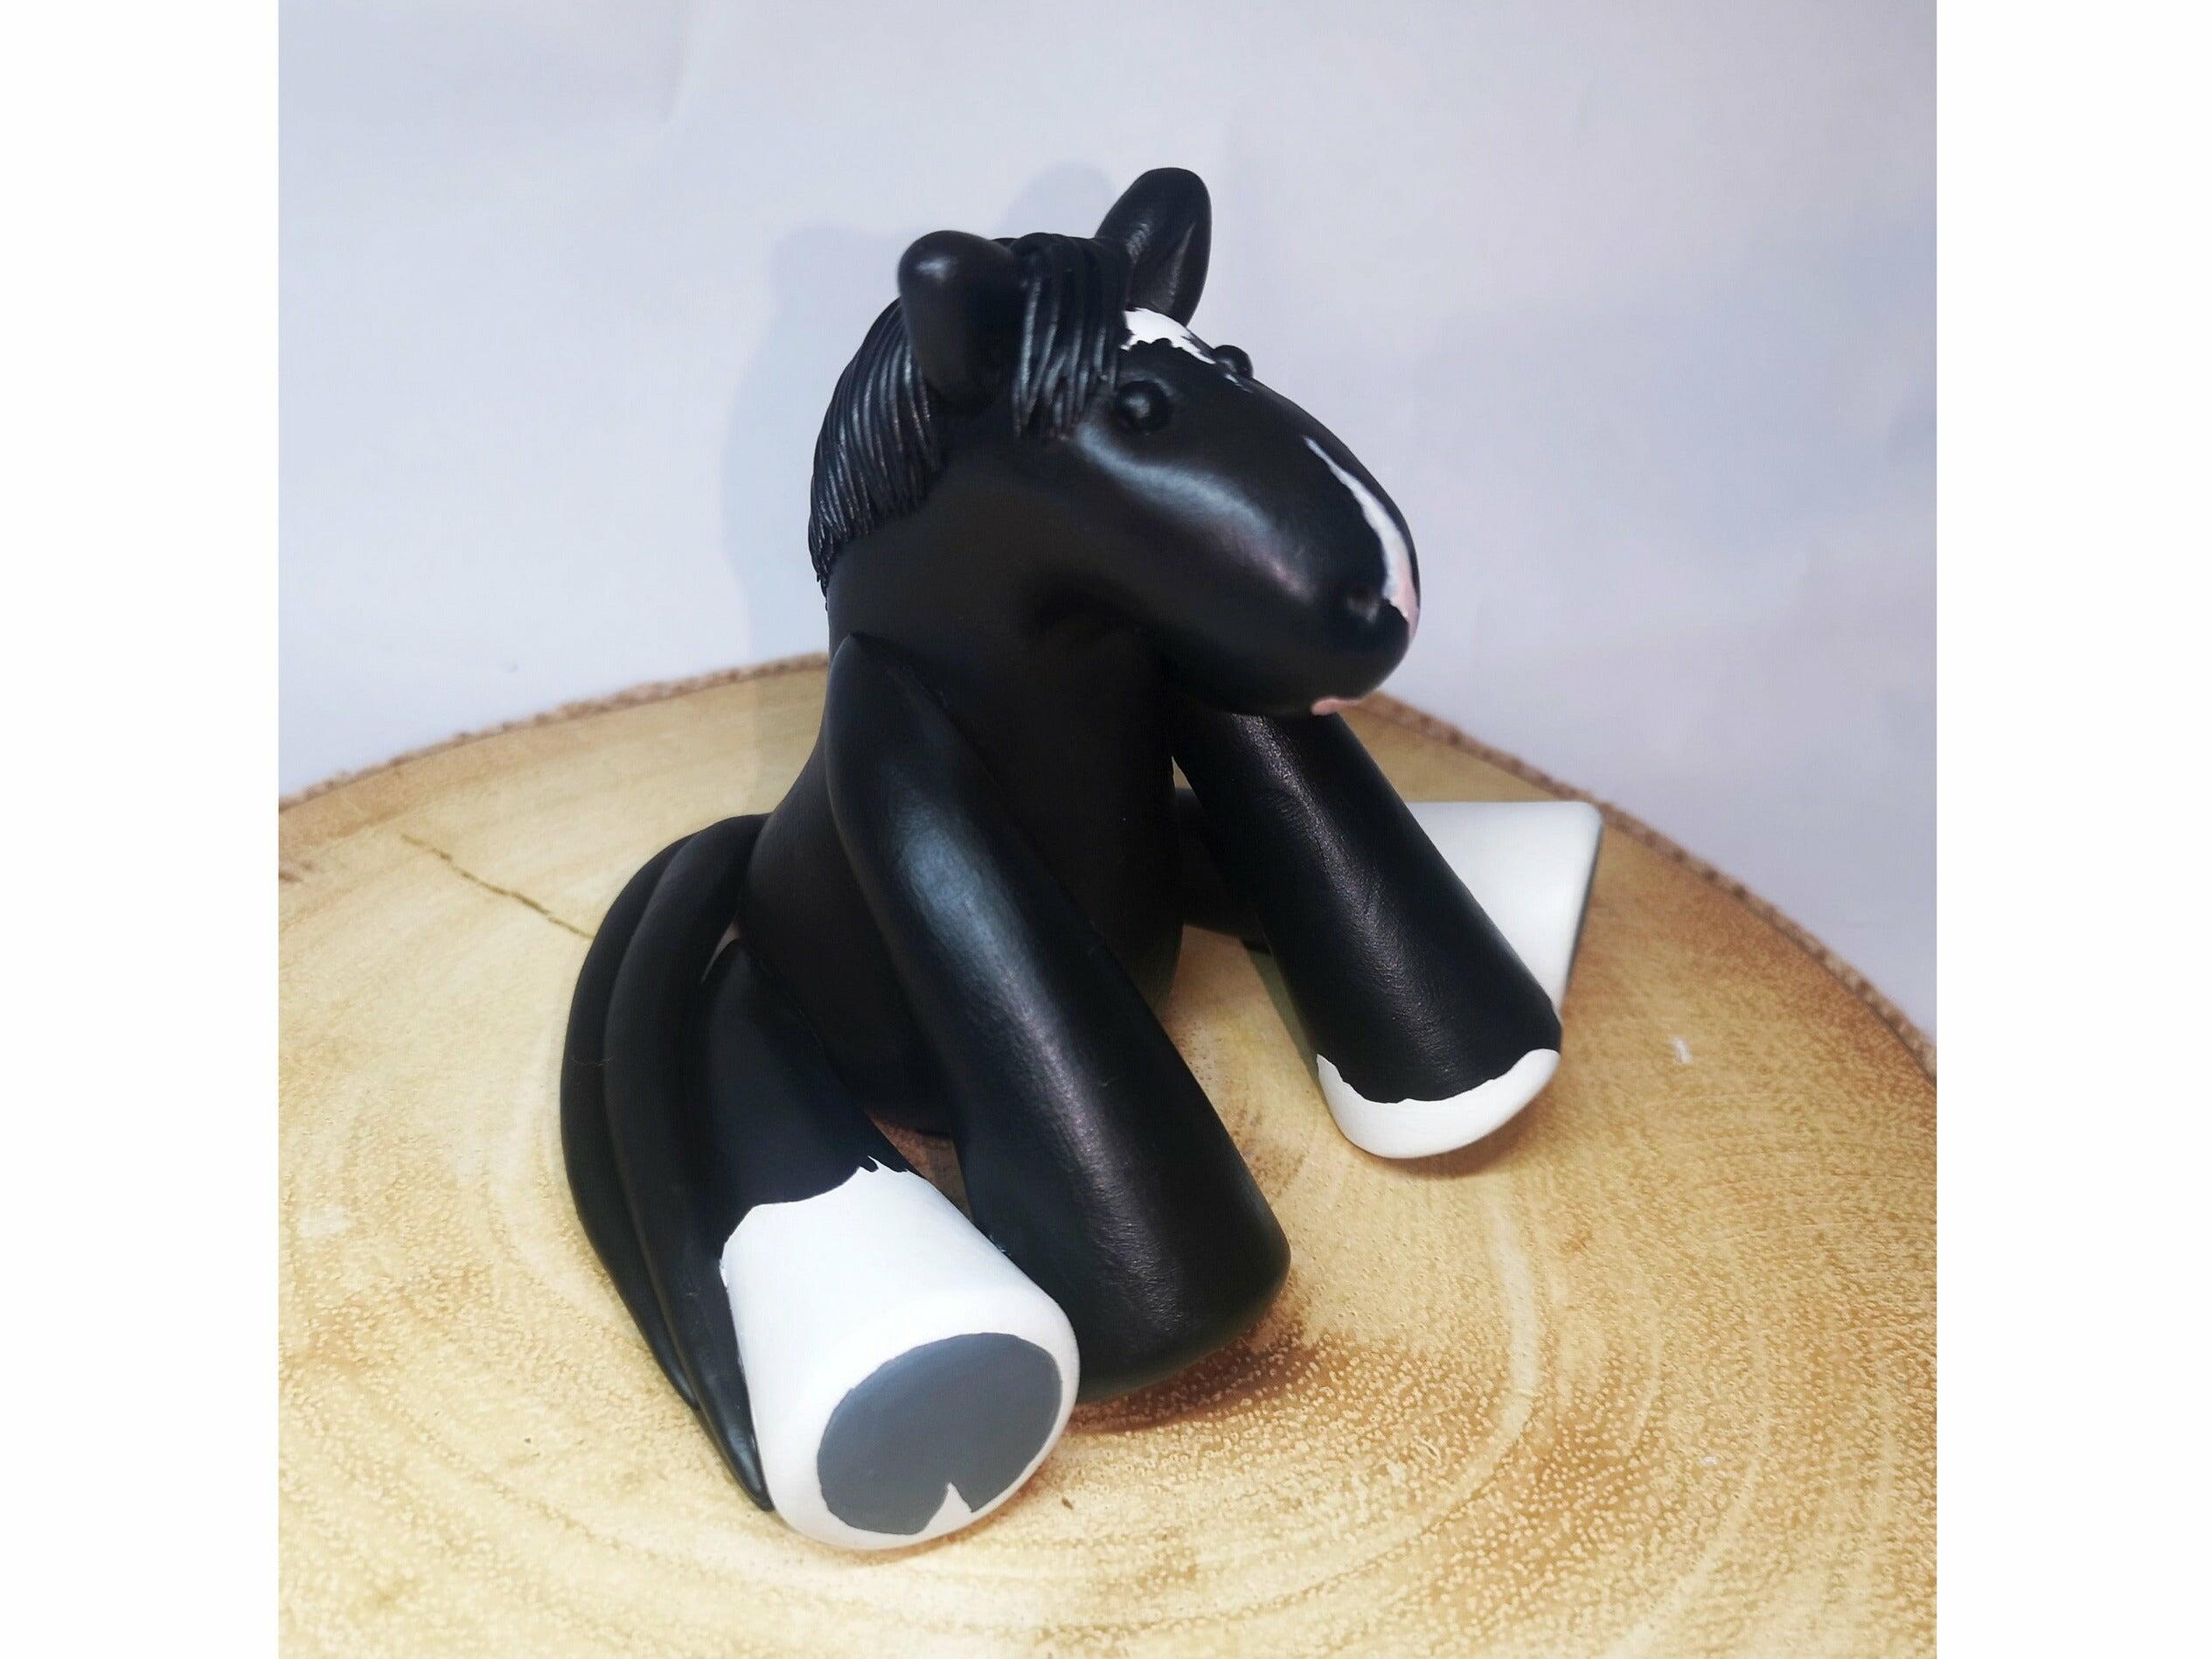 A side profile of a clay model of a black and white gypsy vaner